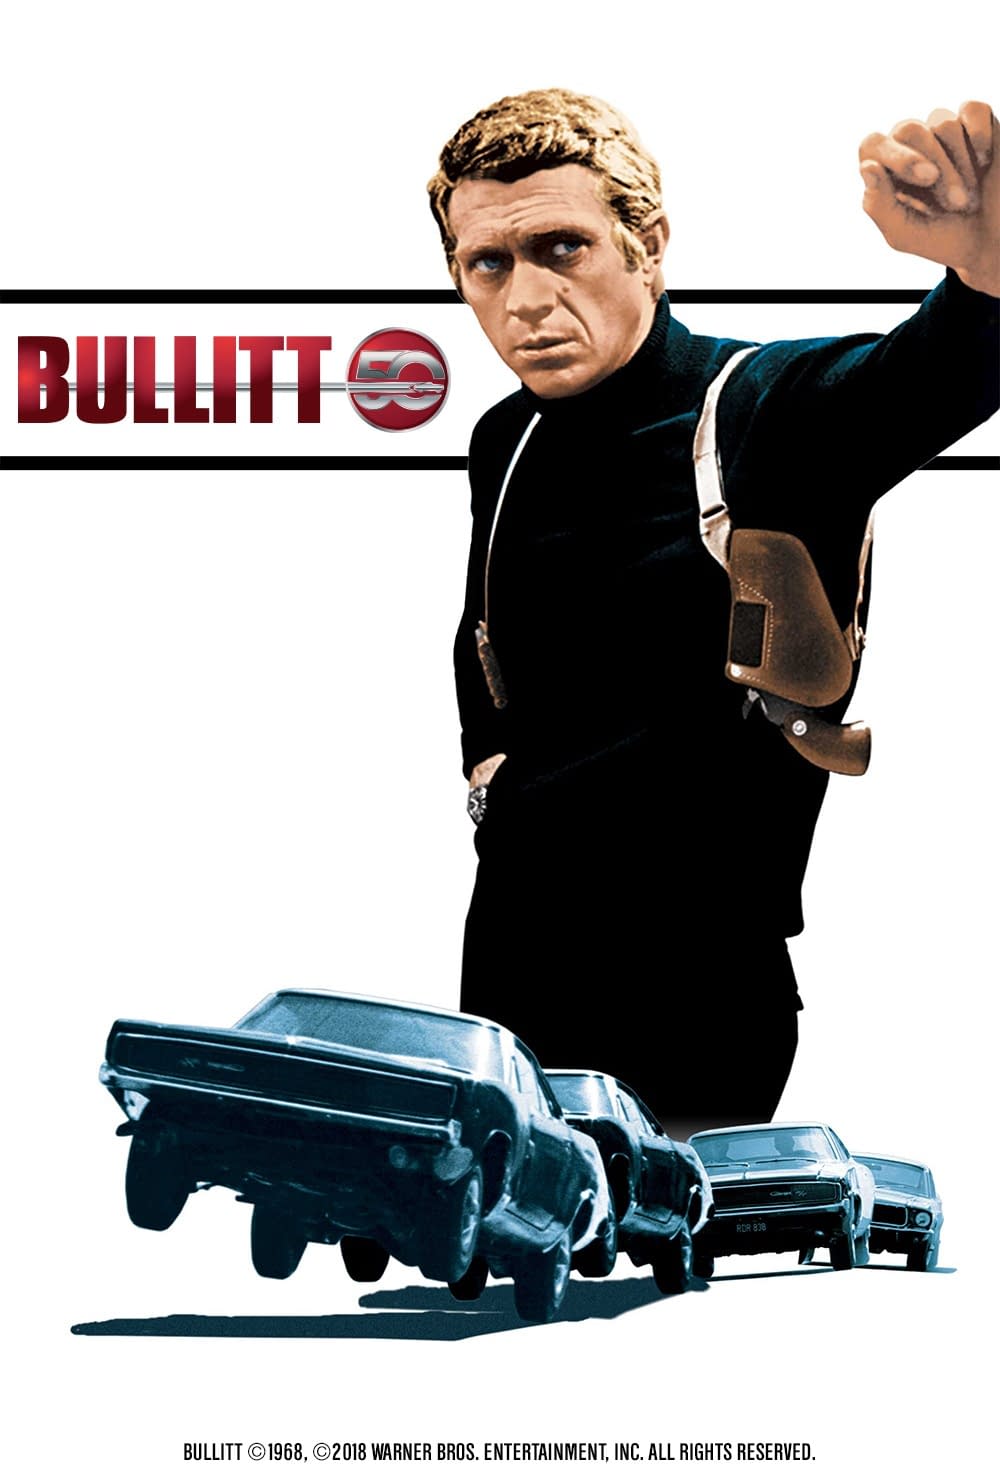 5 Hubcaps and a Movie: Fathom Events Brings 'Bullitt' Back to Theaters